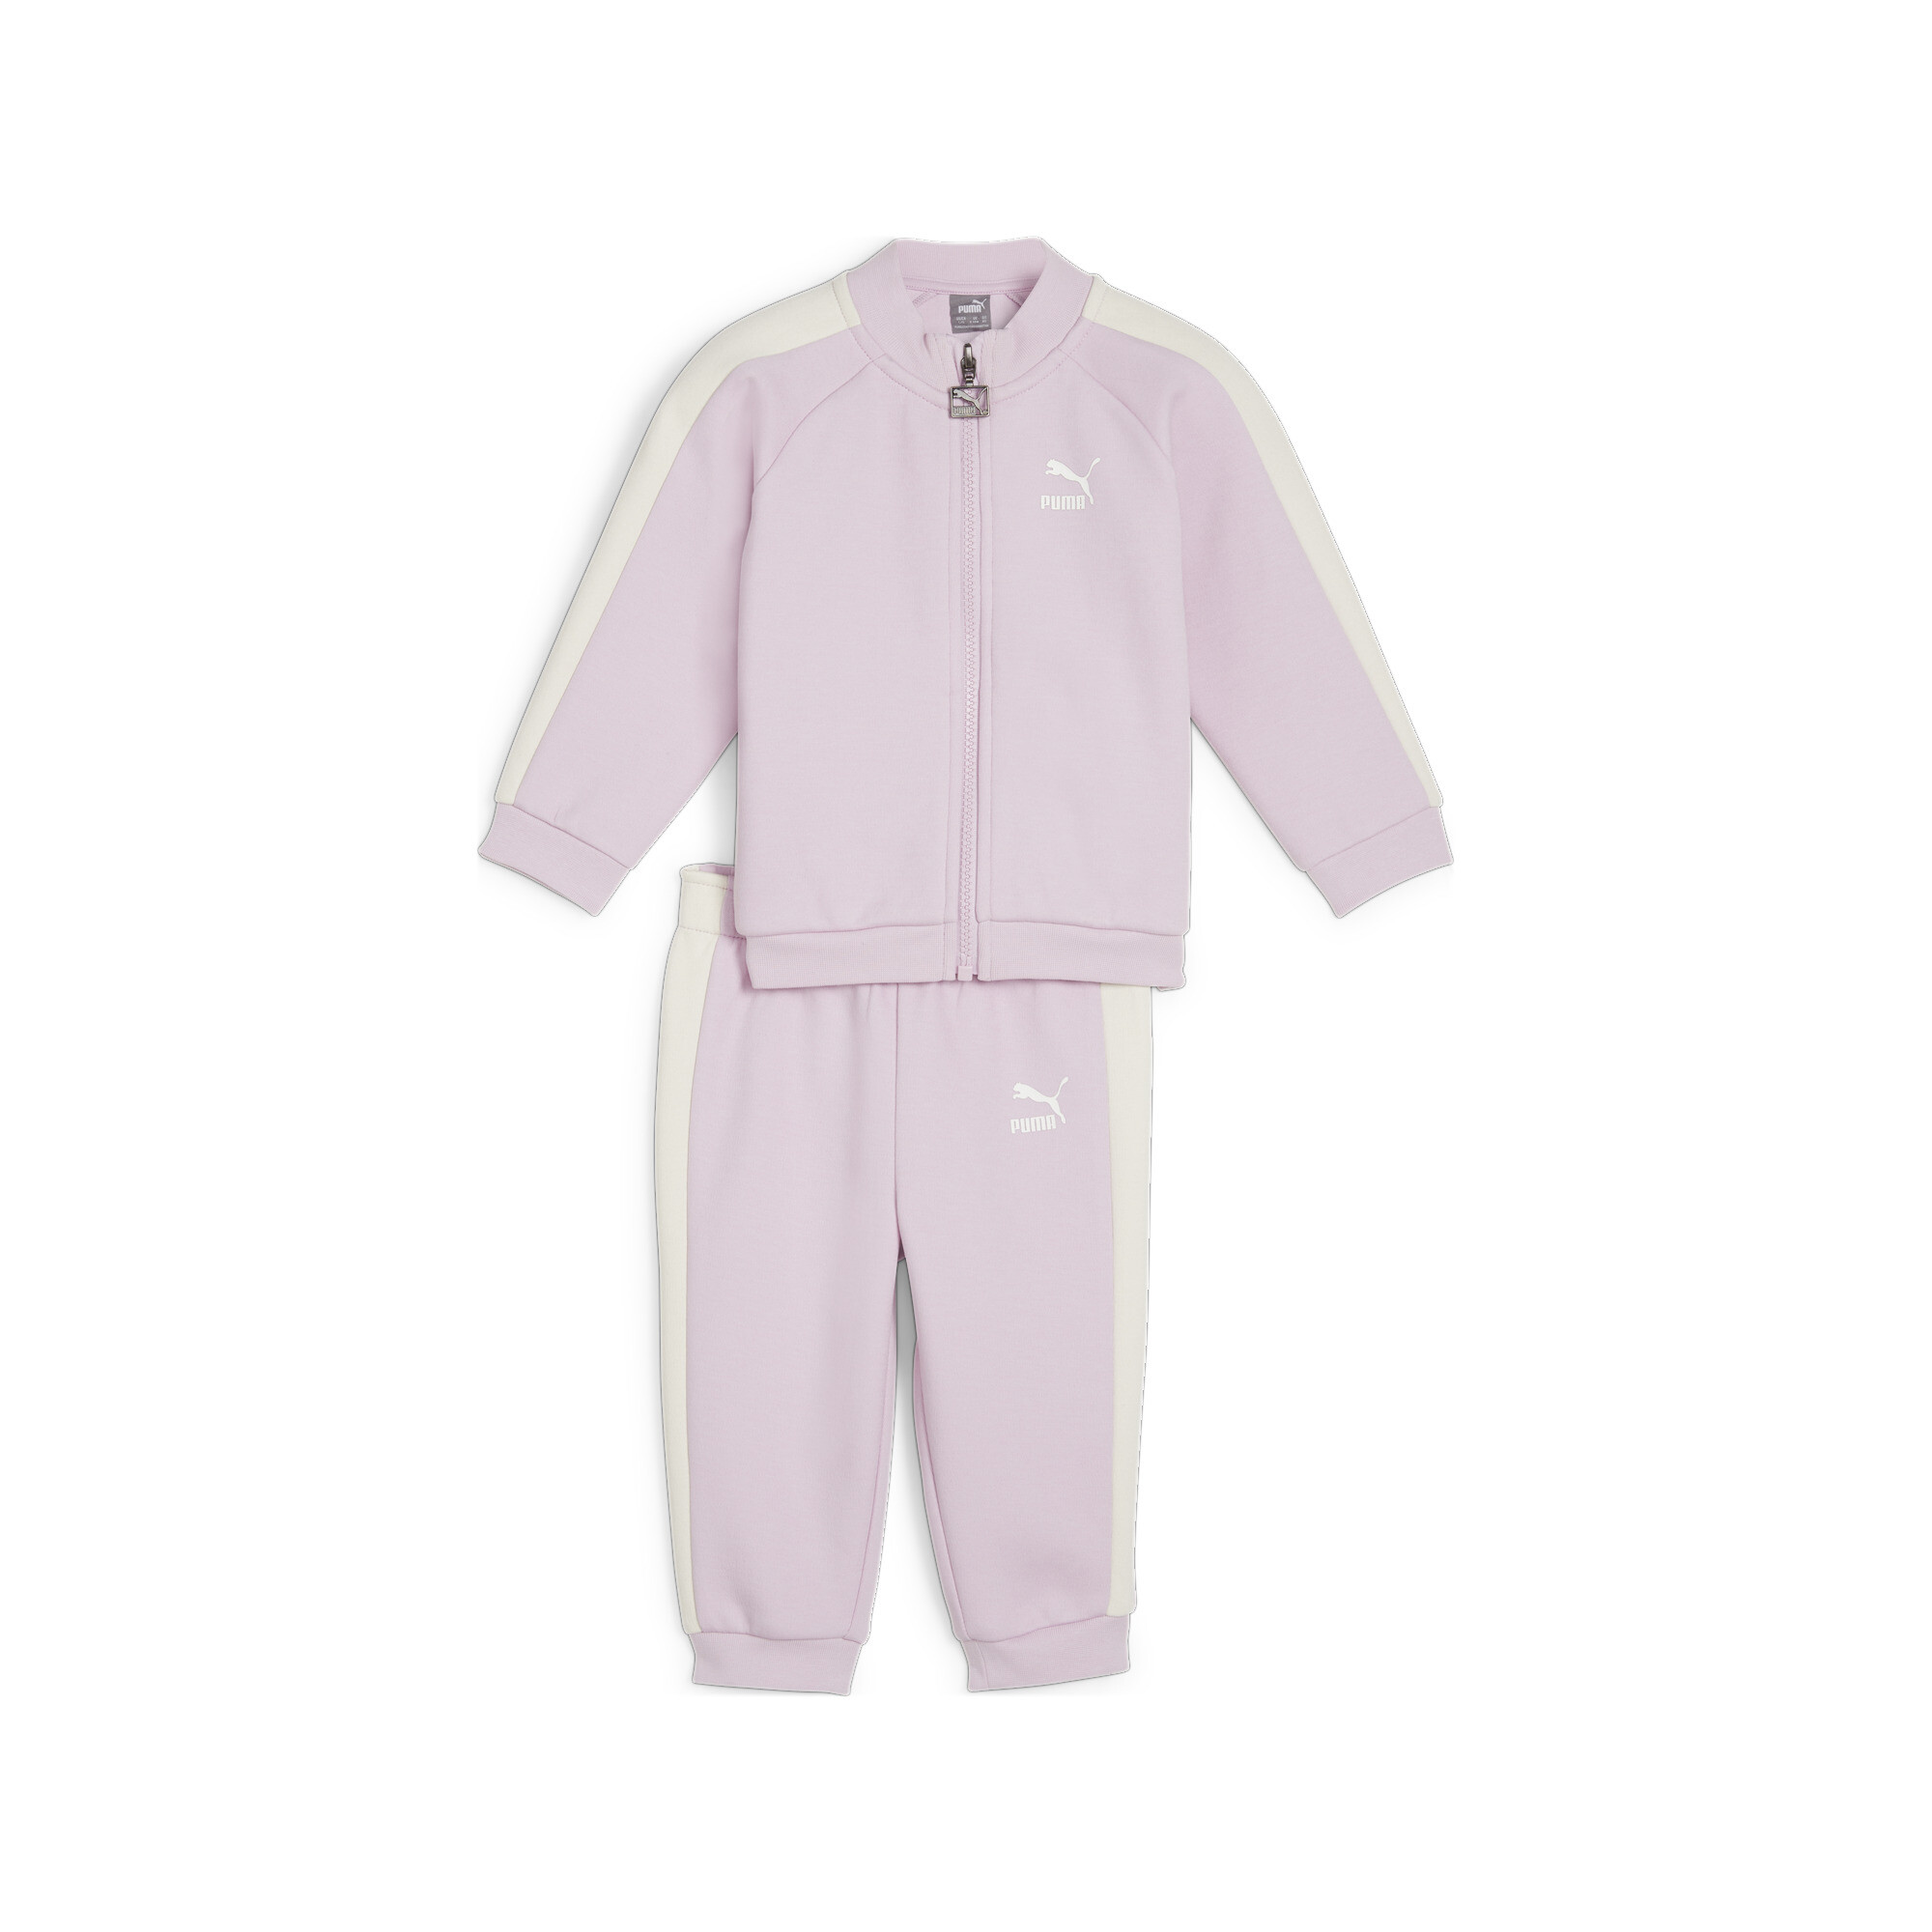 Kids' PUMA MINICATS T7 ICONIC Baby Tracksuit Set In Purple, Size 4-6 Months